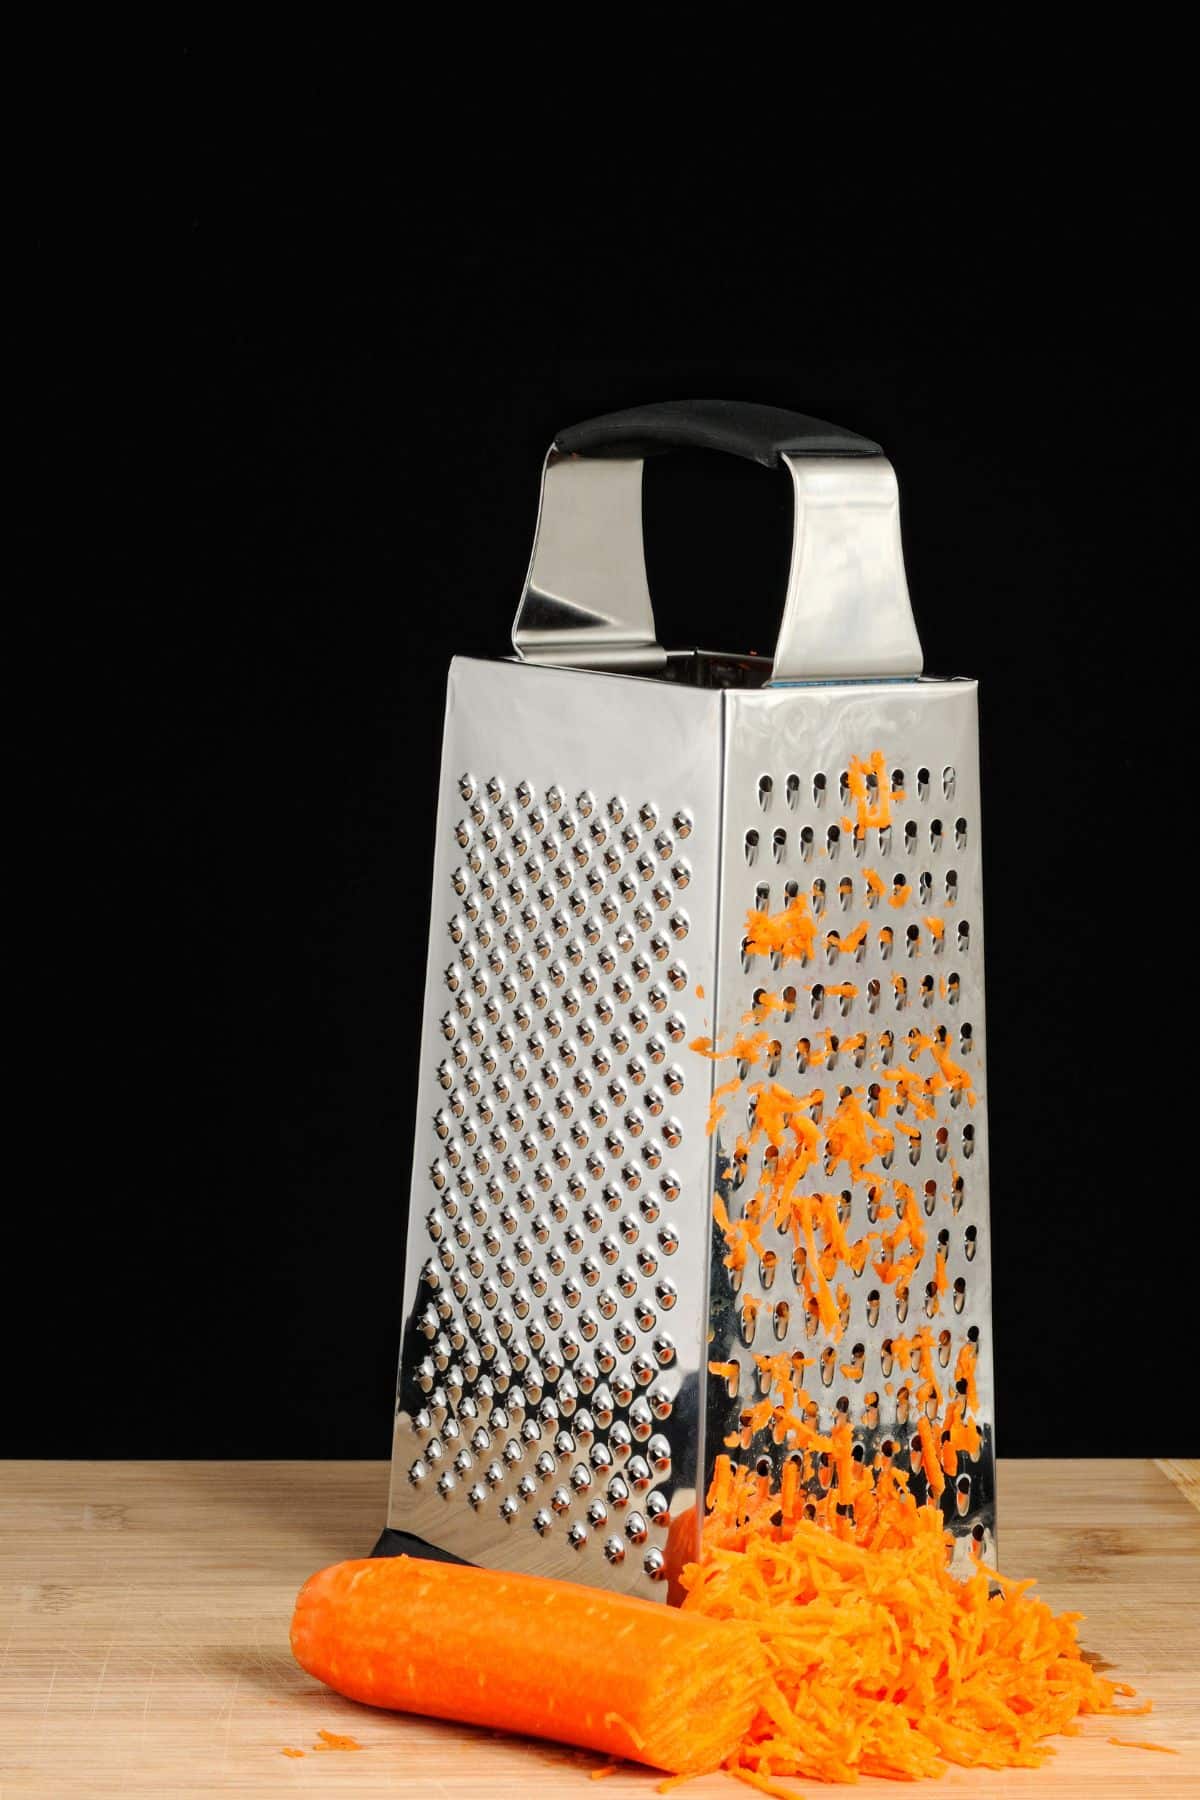 A box grater with a carrot half shredded.